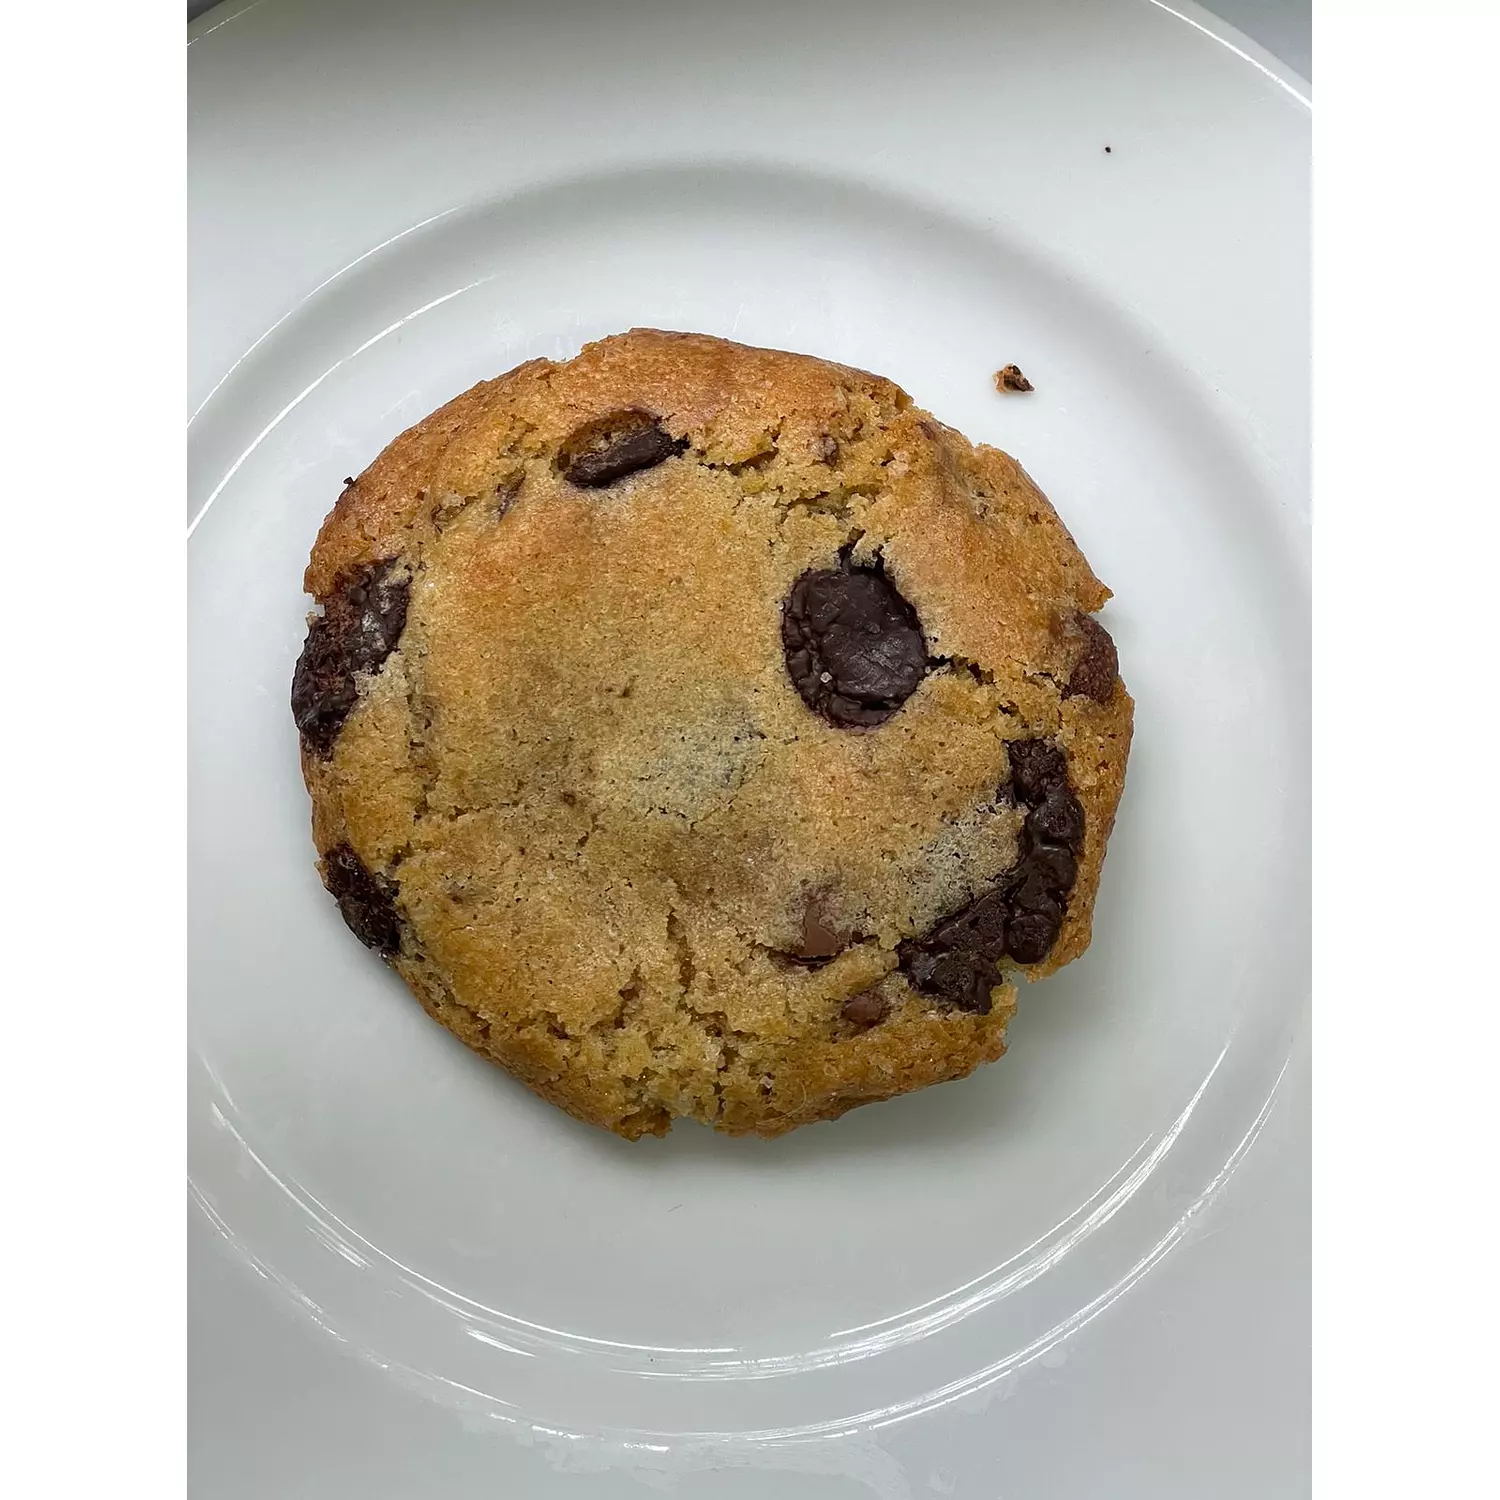 Chocolate Chip Cookies hover image